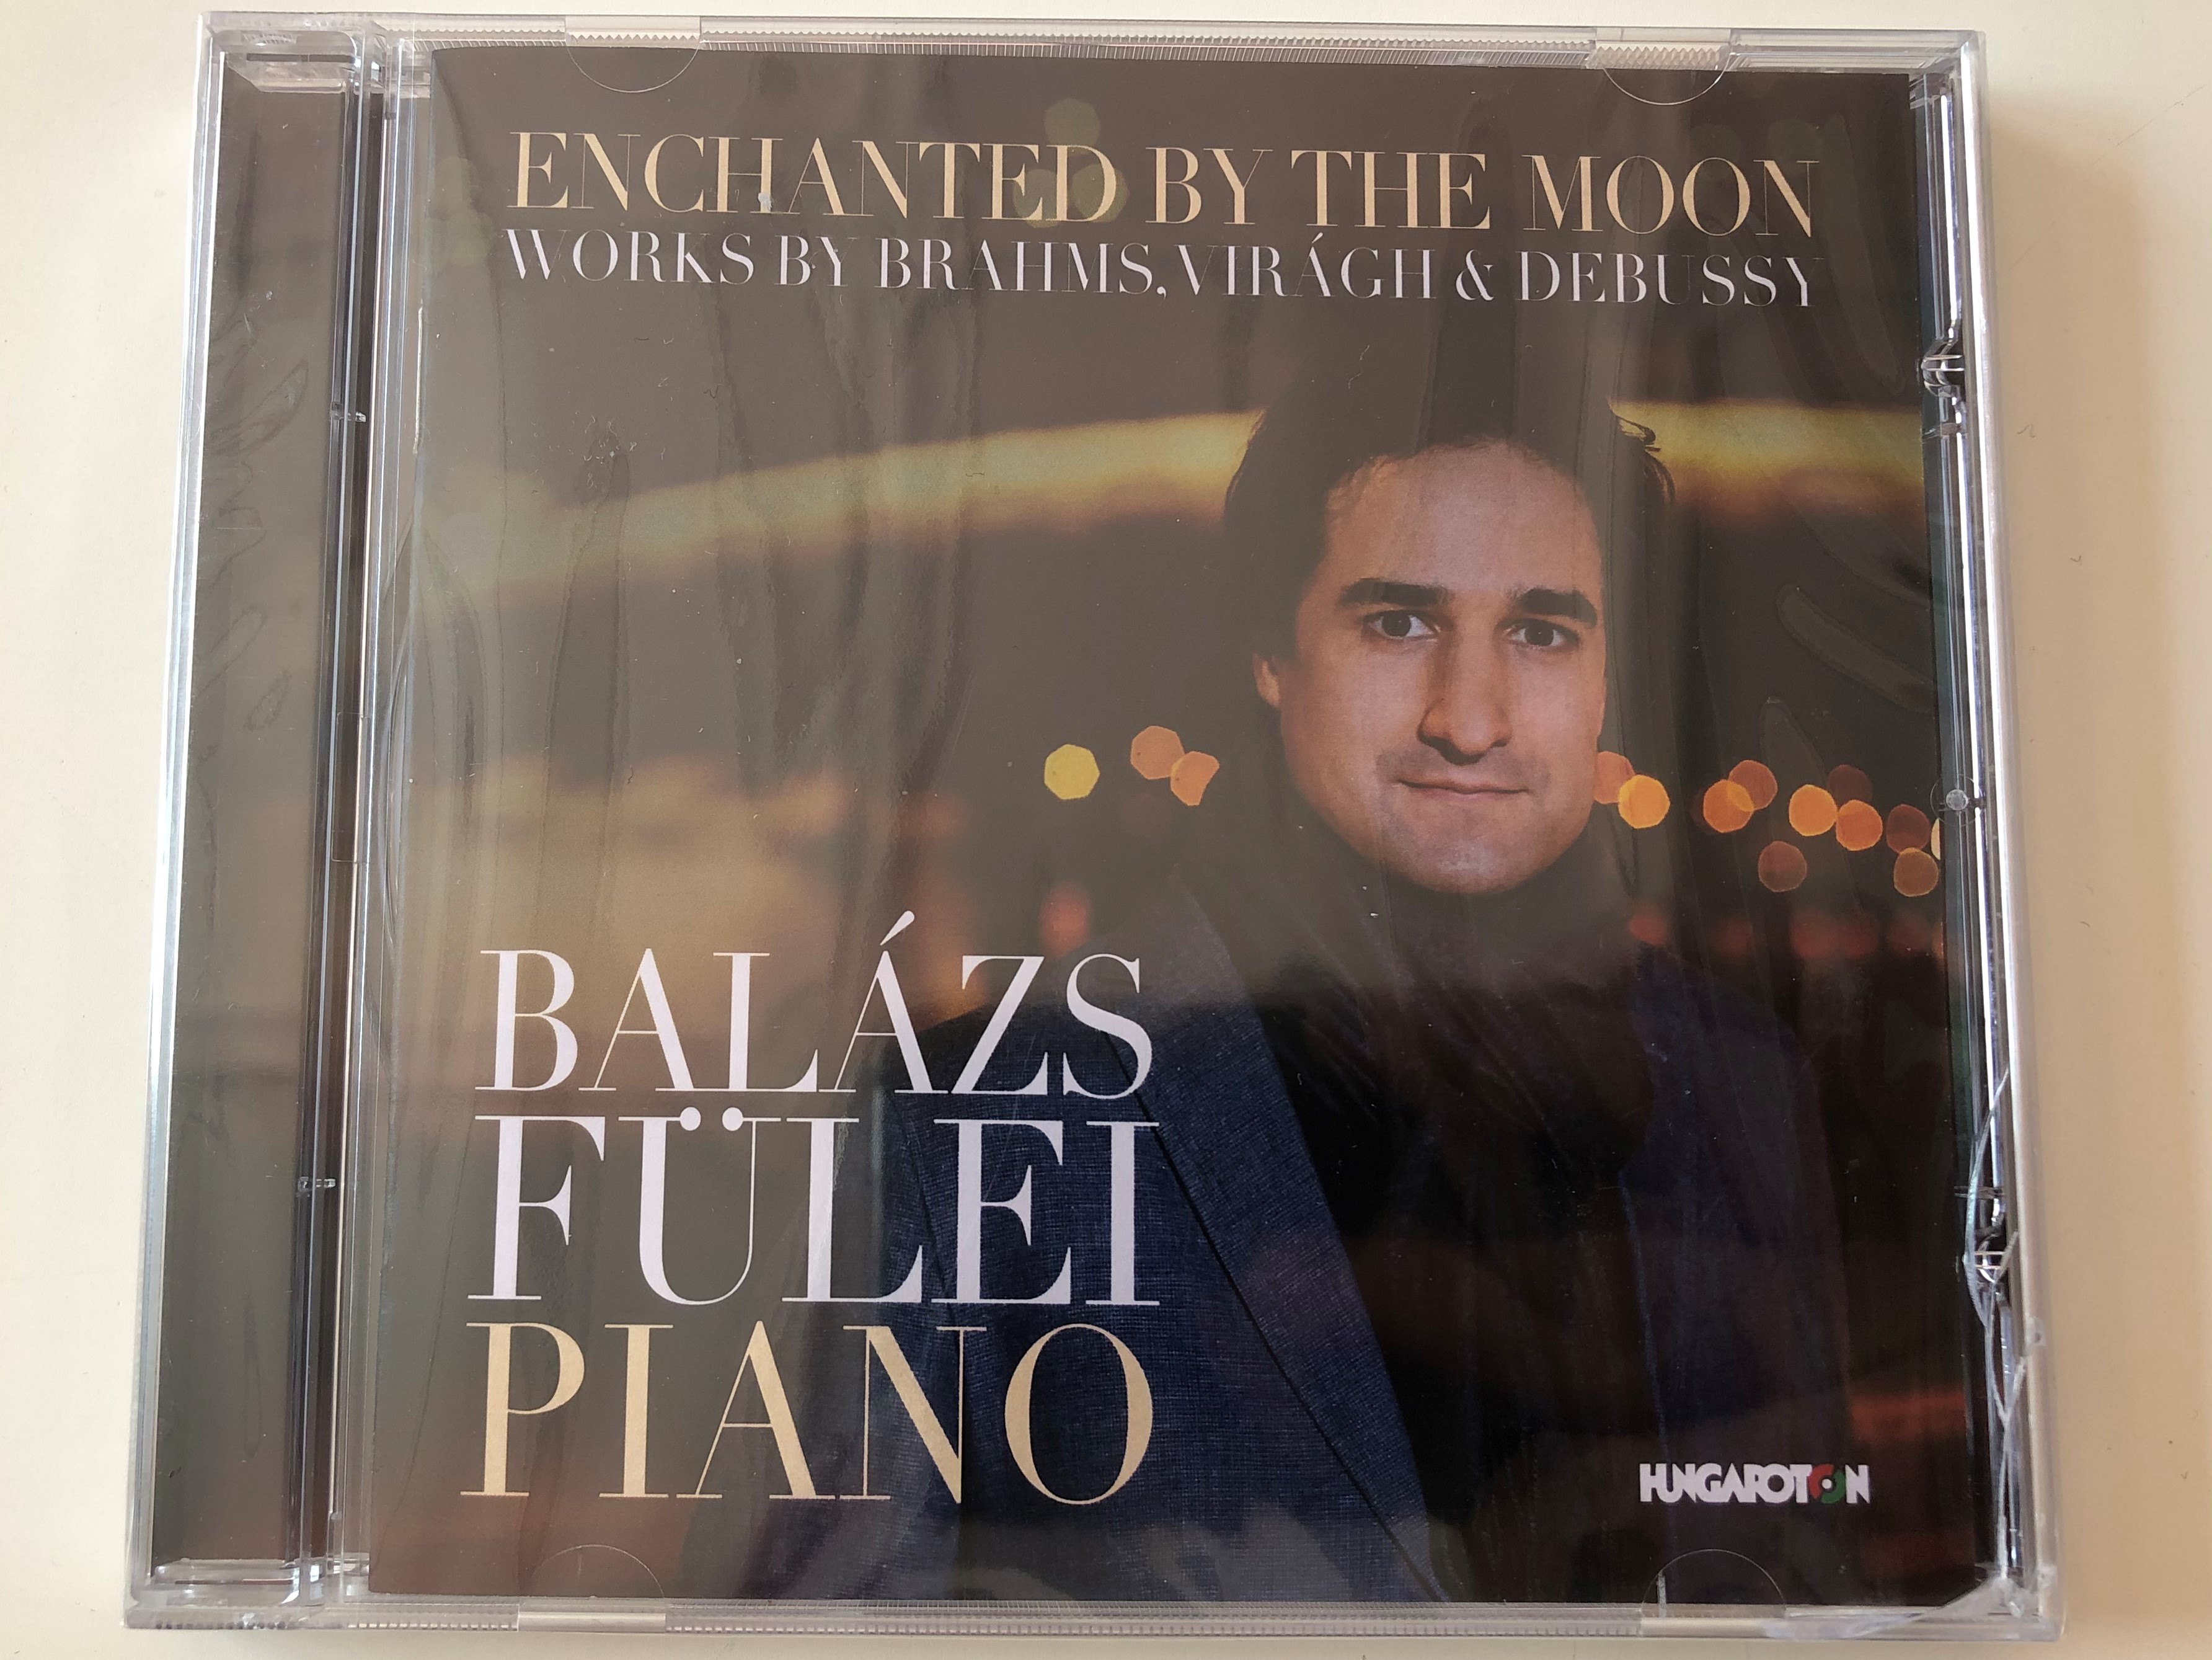 enchanted-by-the-moon-works-by-brahms-vir-gh-debussy-bal-zs-f-lei-piano-hungaroton-audio-cd-2015-5991813276827-1-.jpg